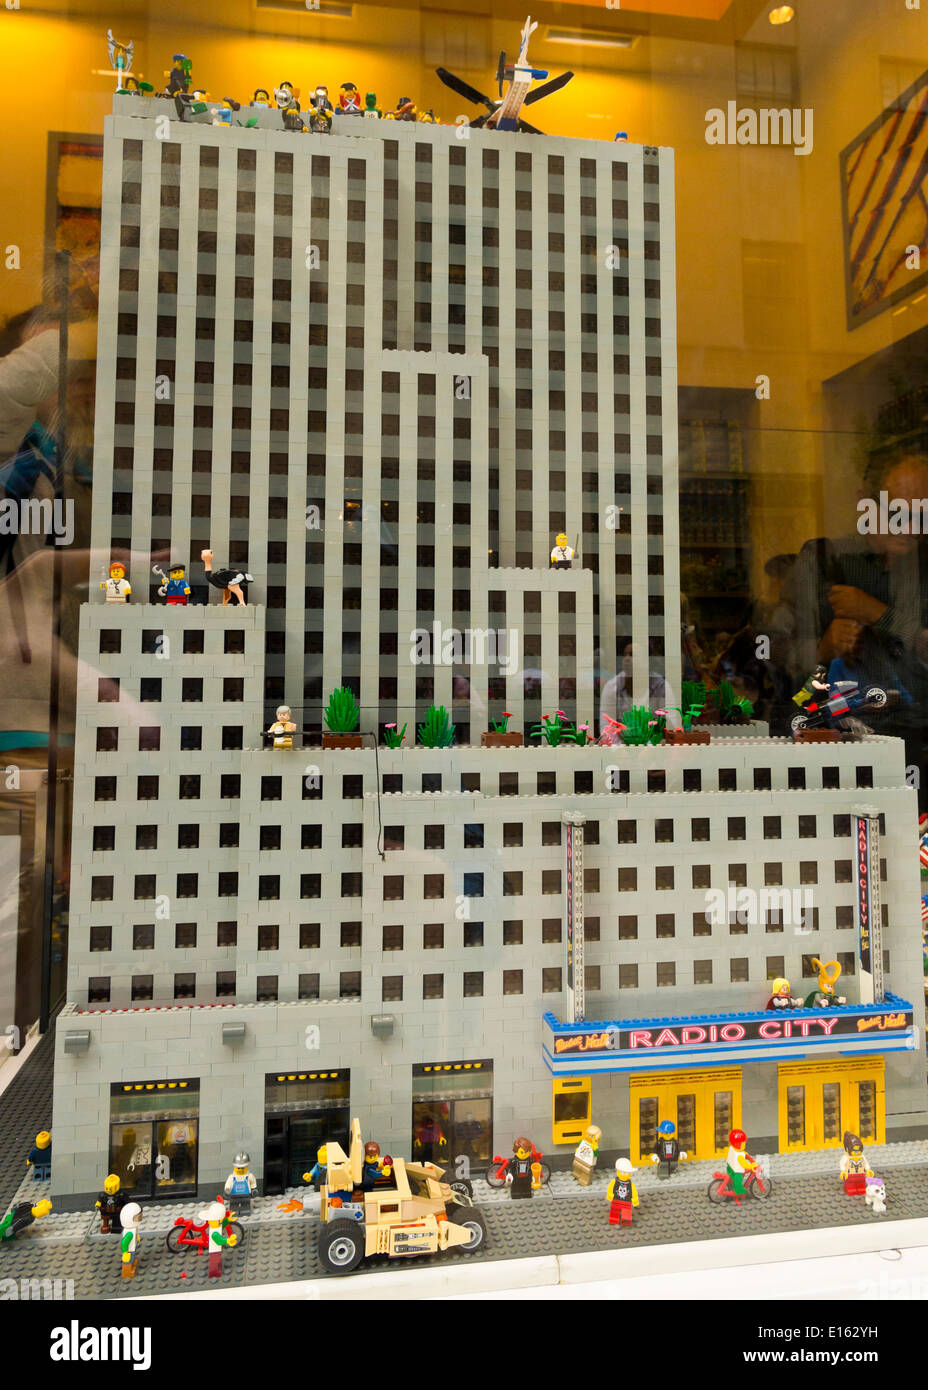 Manhattan, New York, U.S. - May 21, 2014 - In Rockefeller Center, the Lego  store has Lego Miniland with a recreation of Radio City Music Hall in its  window display, in Manhattan.